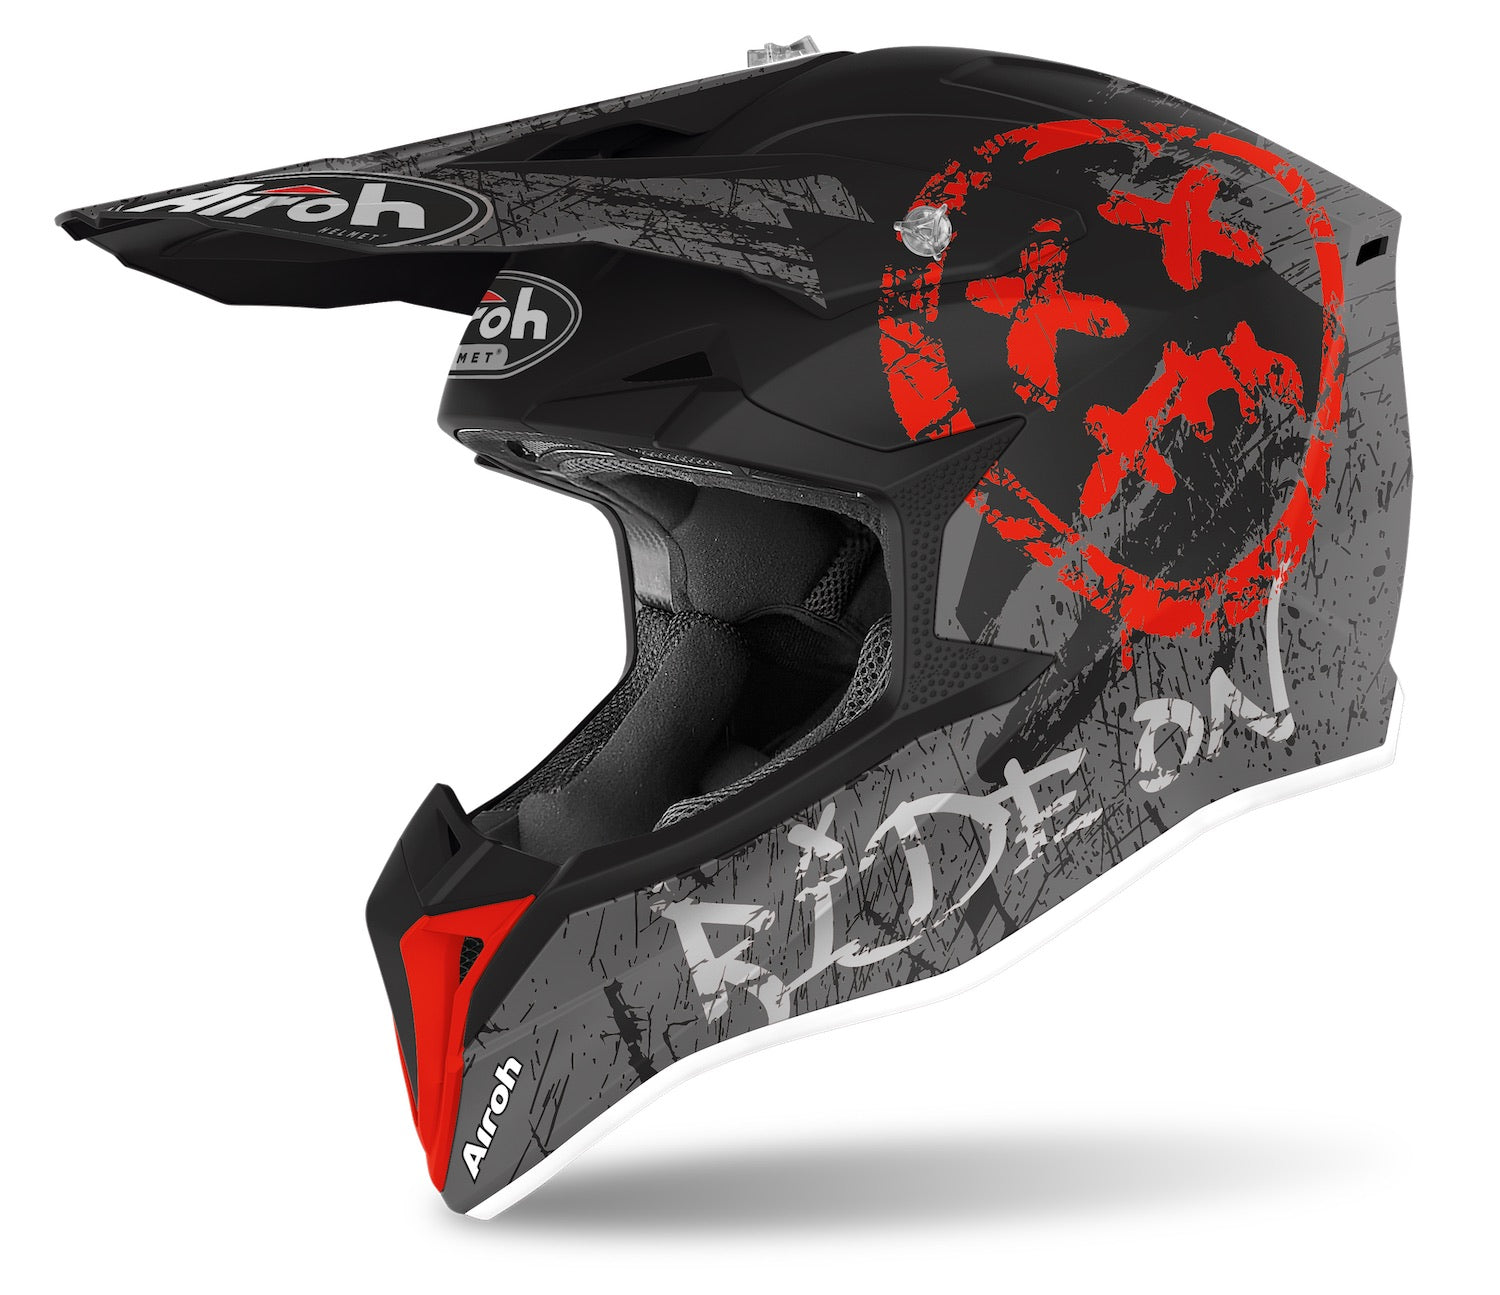 AIROH WRAAP YOUTH CASCO MOTO OFF-ROAD WRSM55Y SMILE ROSSO MATTO S 